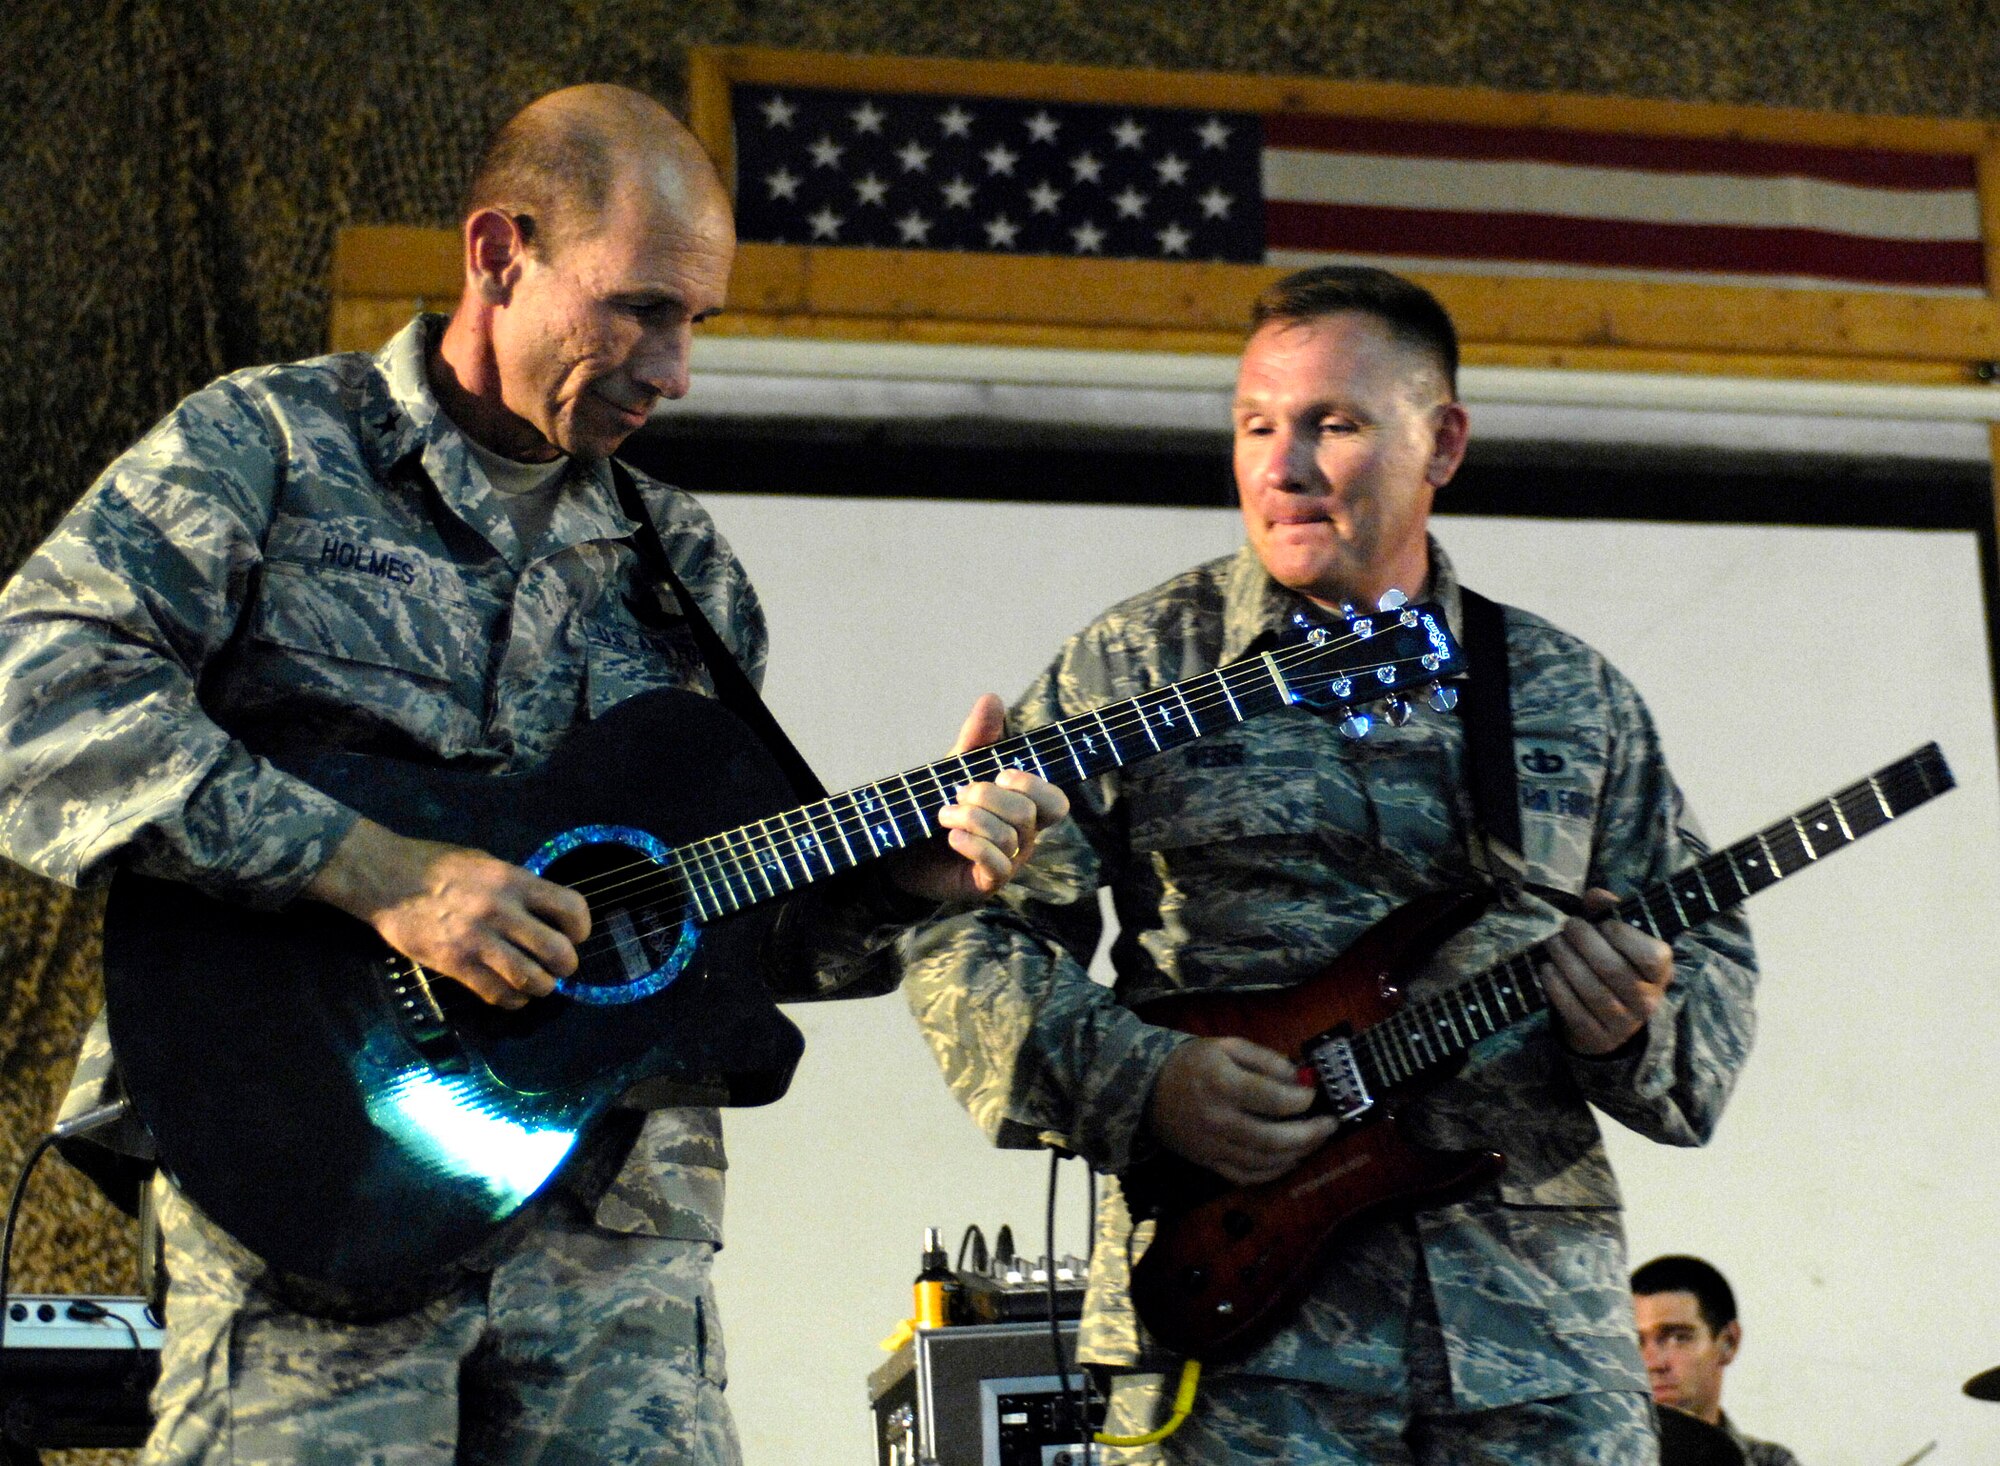 Brig. Gen. James M. "Mike" Holmes plays guitar as Senior Master Sgt. James Weber looks on during the band's show June 22 at Bagram Air Base, Afghanistan. The U.S. Air Forces Central Band "Falcon" band travels throughout the area of responsibility to promote troop morale and to reach out to host nation communities. General Holmes is the 455th Air Expeditionary Wing commander. Sergeant Weber is the band's vocalist and guitarist. (U.S. Air Force photo/Master Sgt. Demetrius Lester) 
